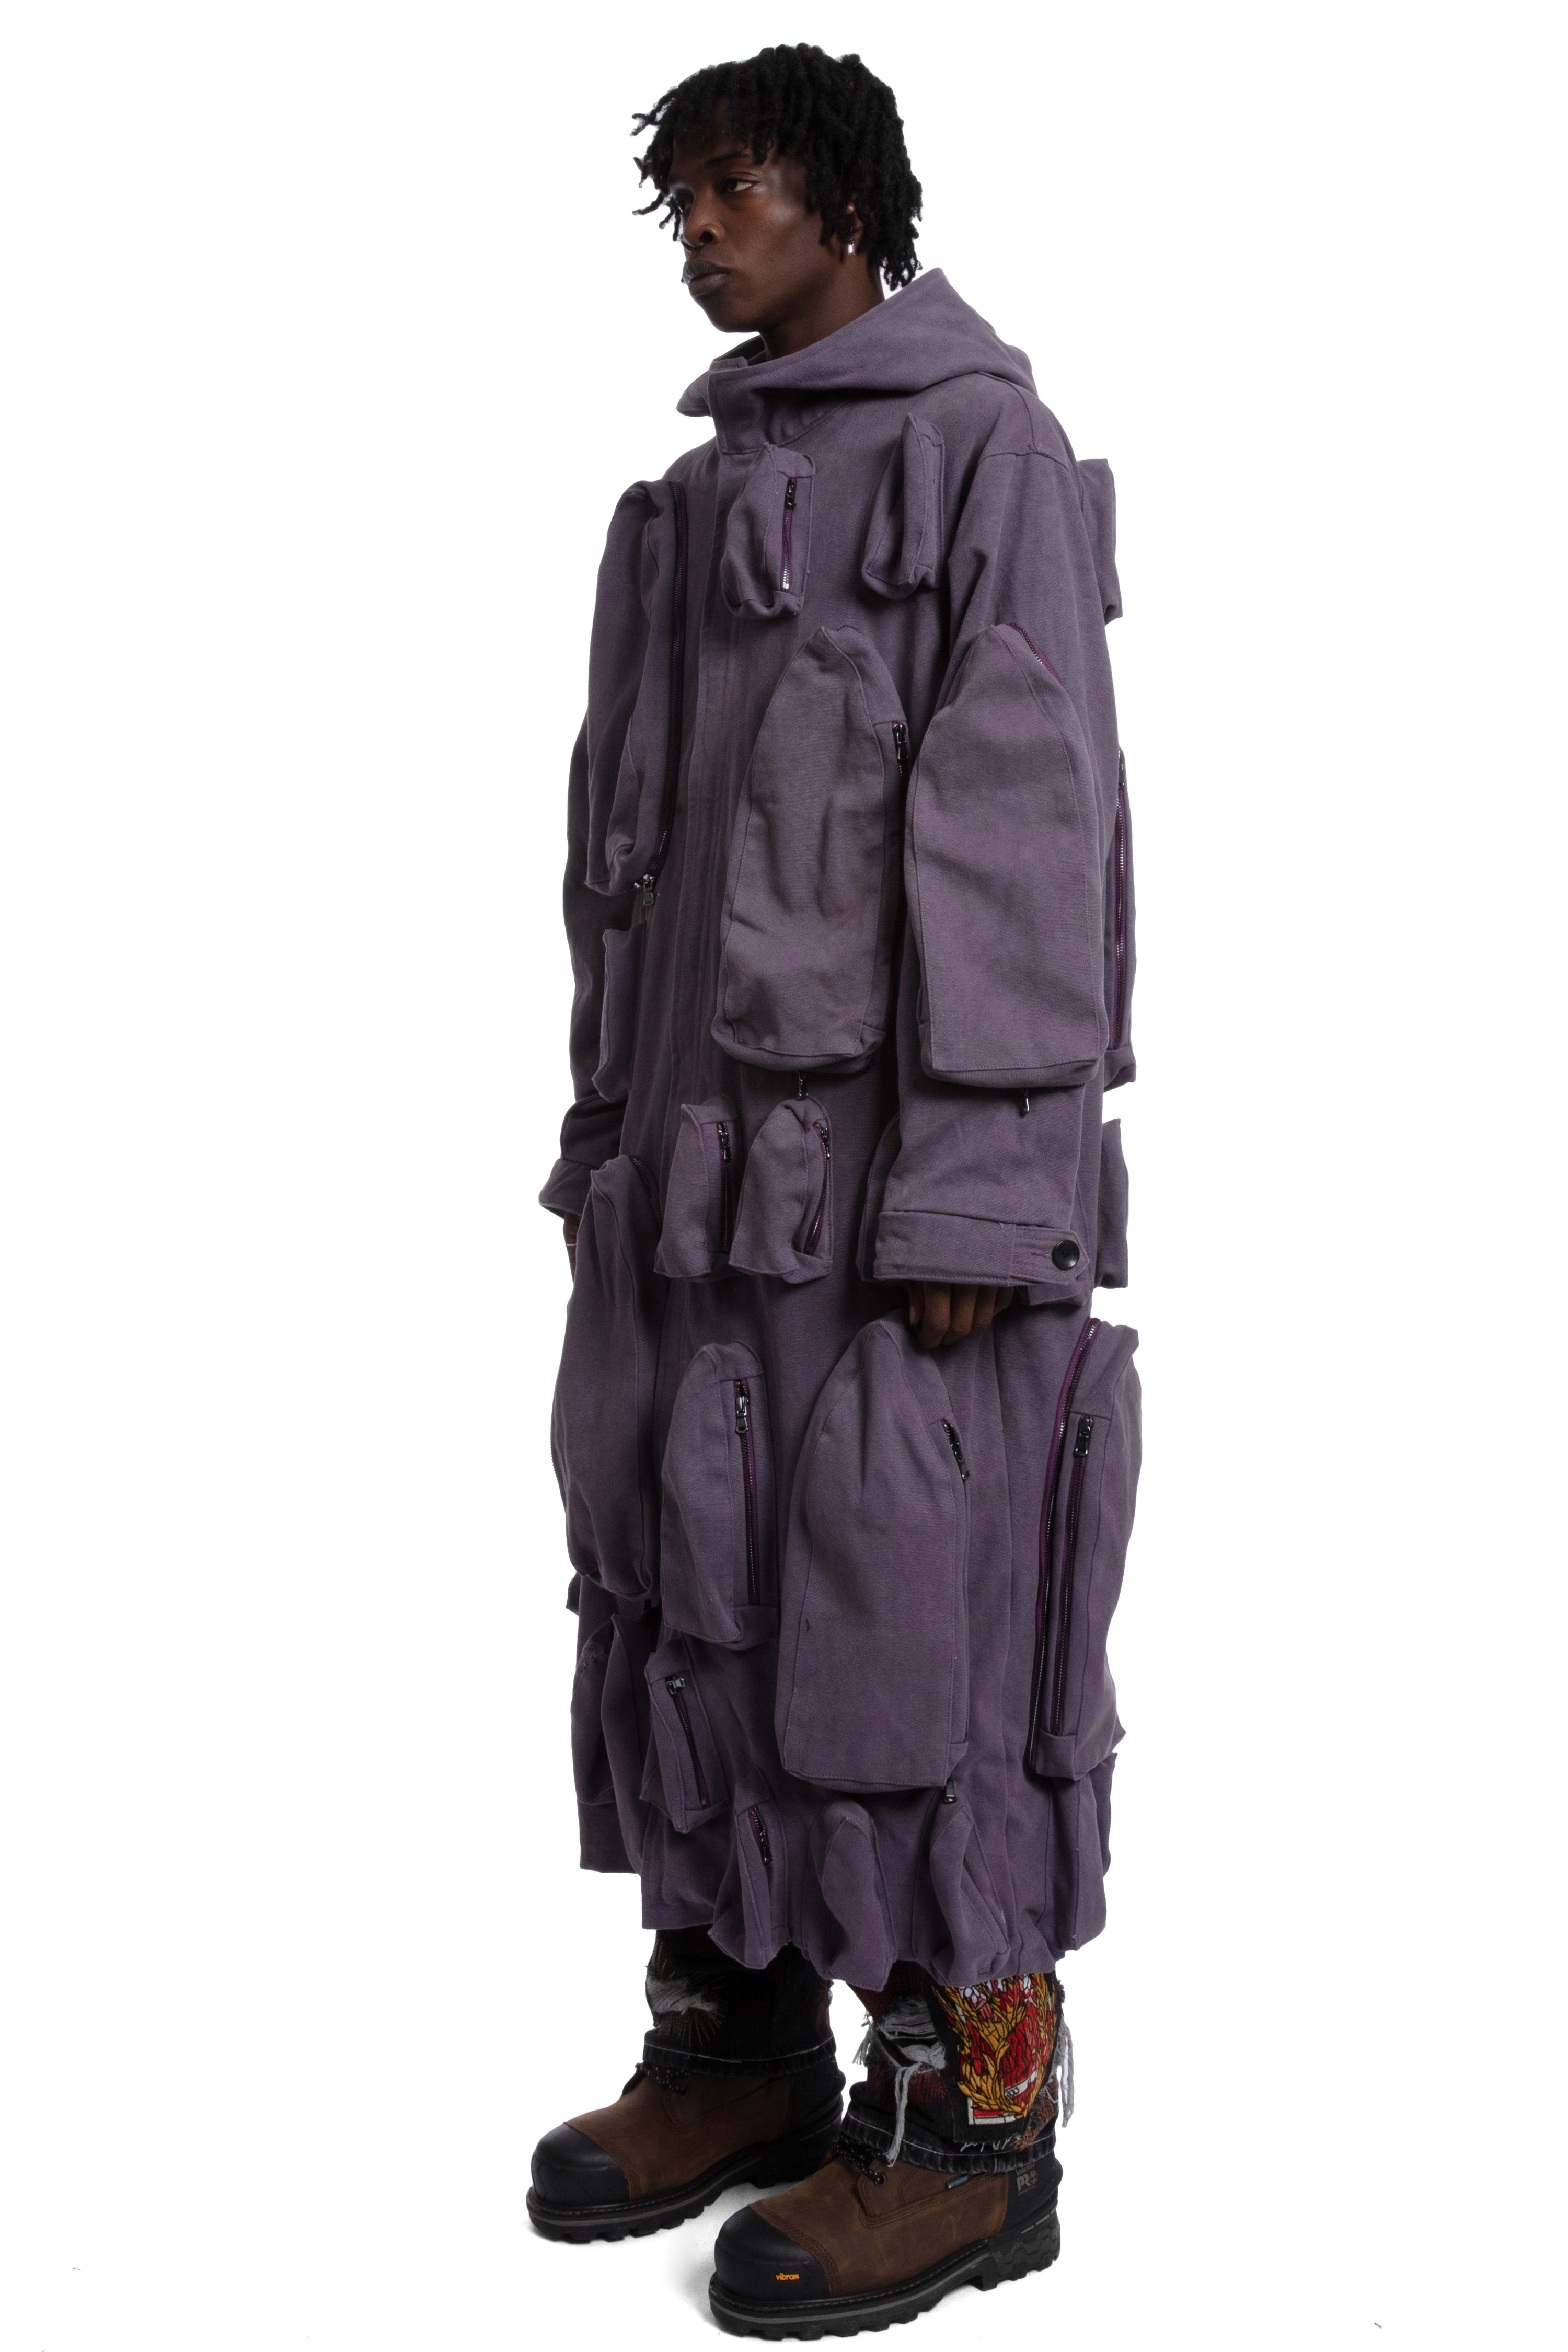 WINDOW POCKET FLOOR-LENGTH TRENCH – WHO DECIDES WAR